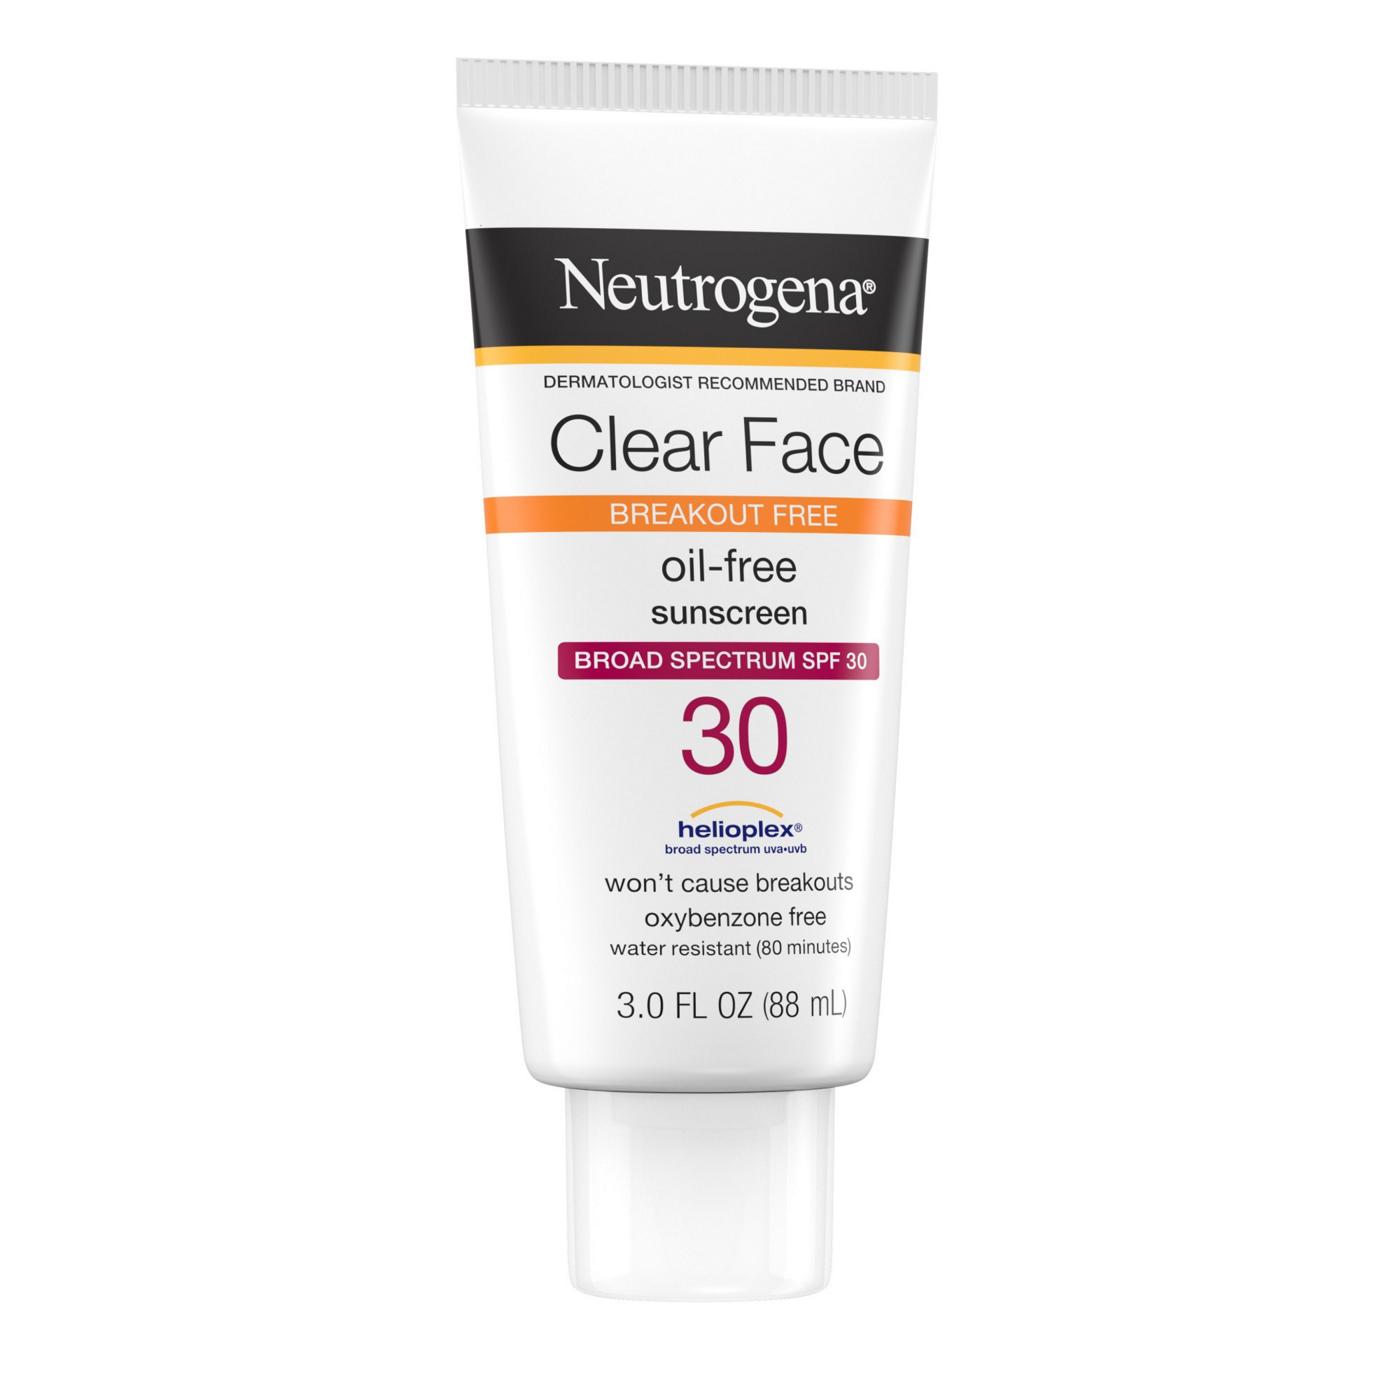 Neutrogena Clear Face Oil-Free Sunscreen Lotion - SPF 30; image 7 of 7